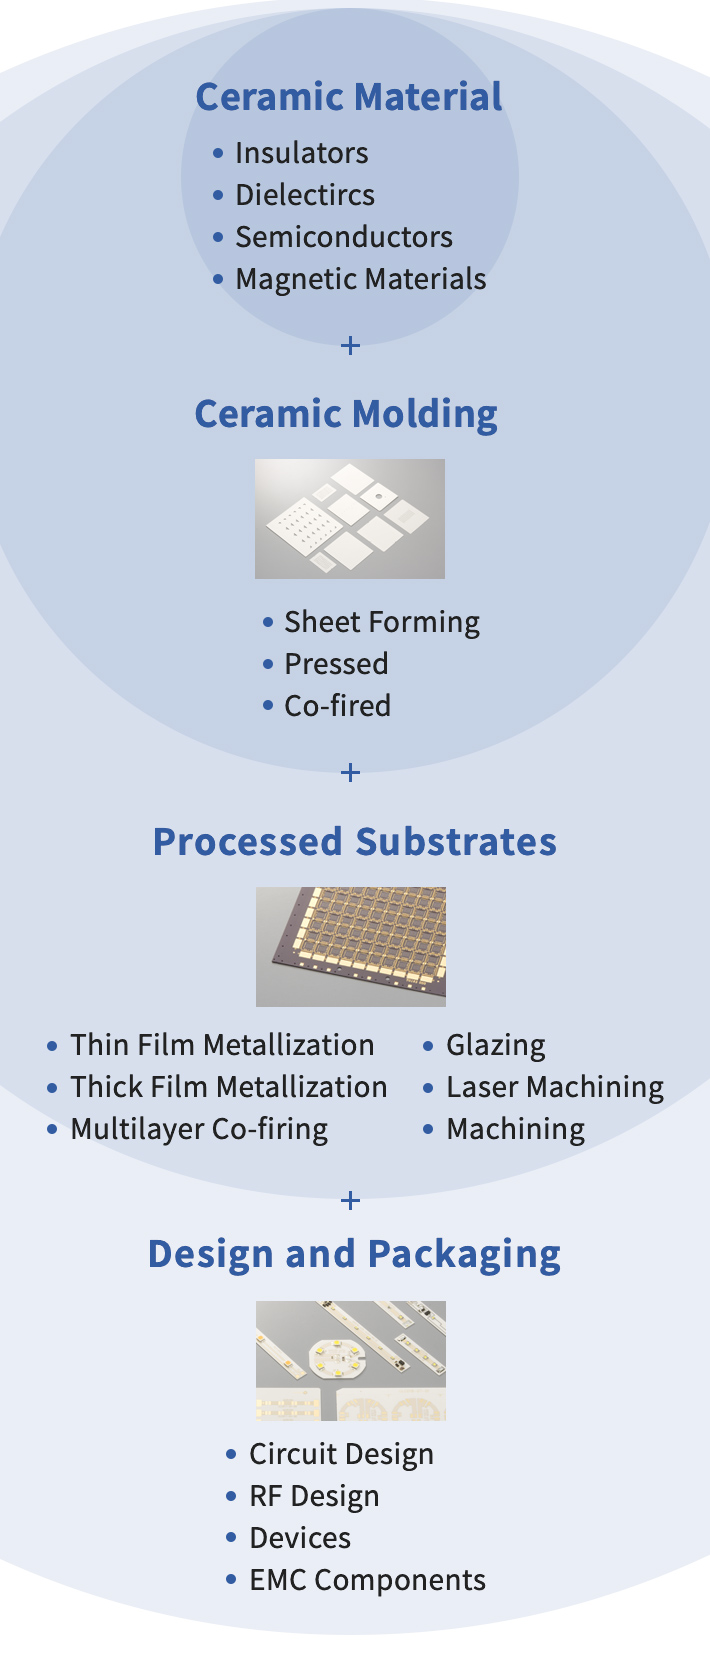 Ceramics Technology as Our Technology Core”